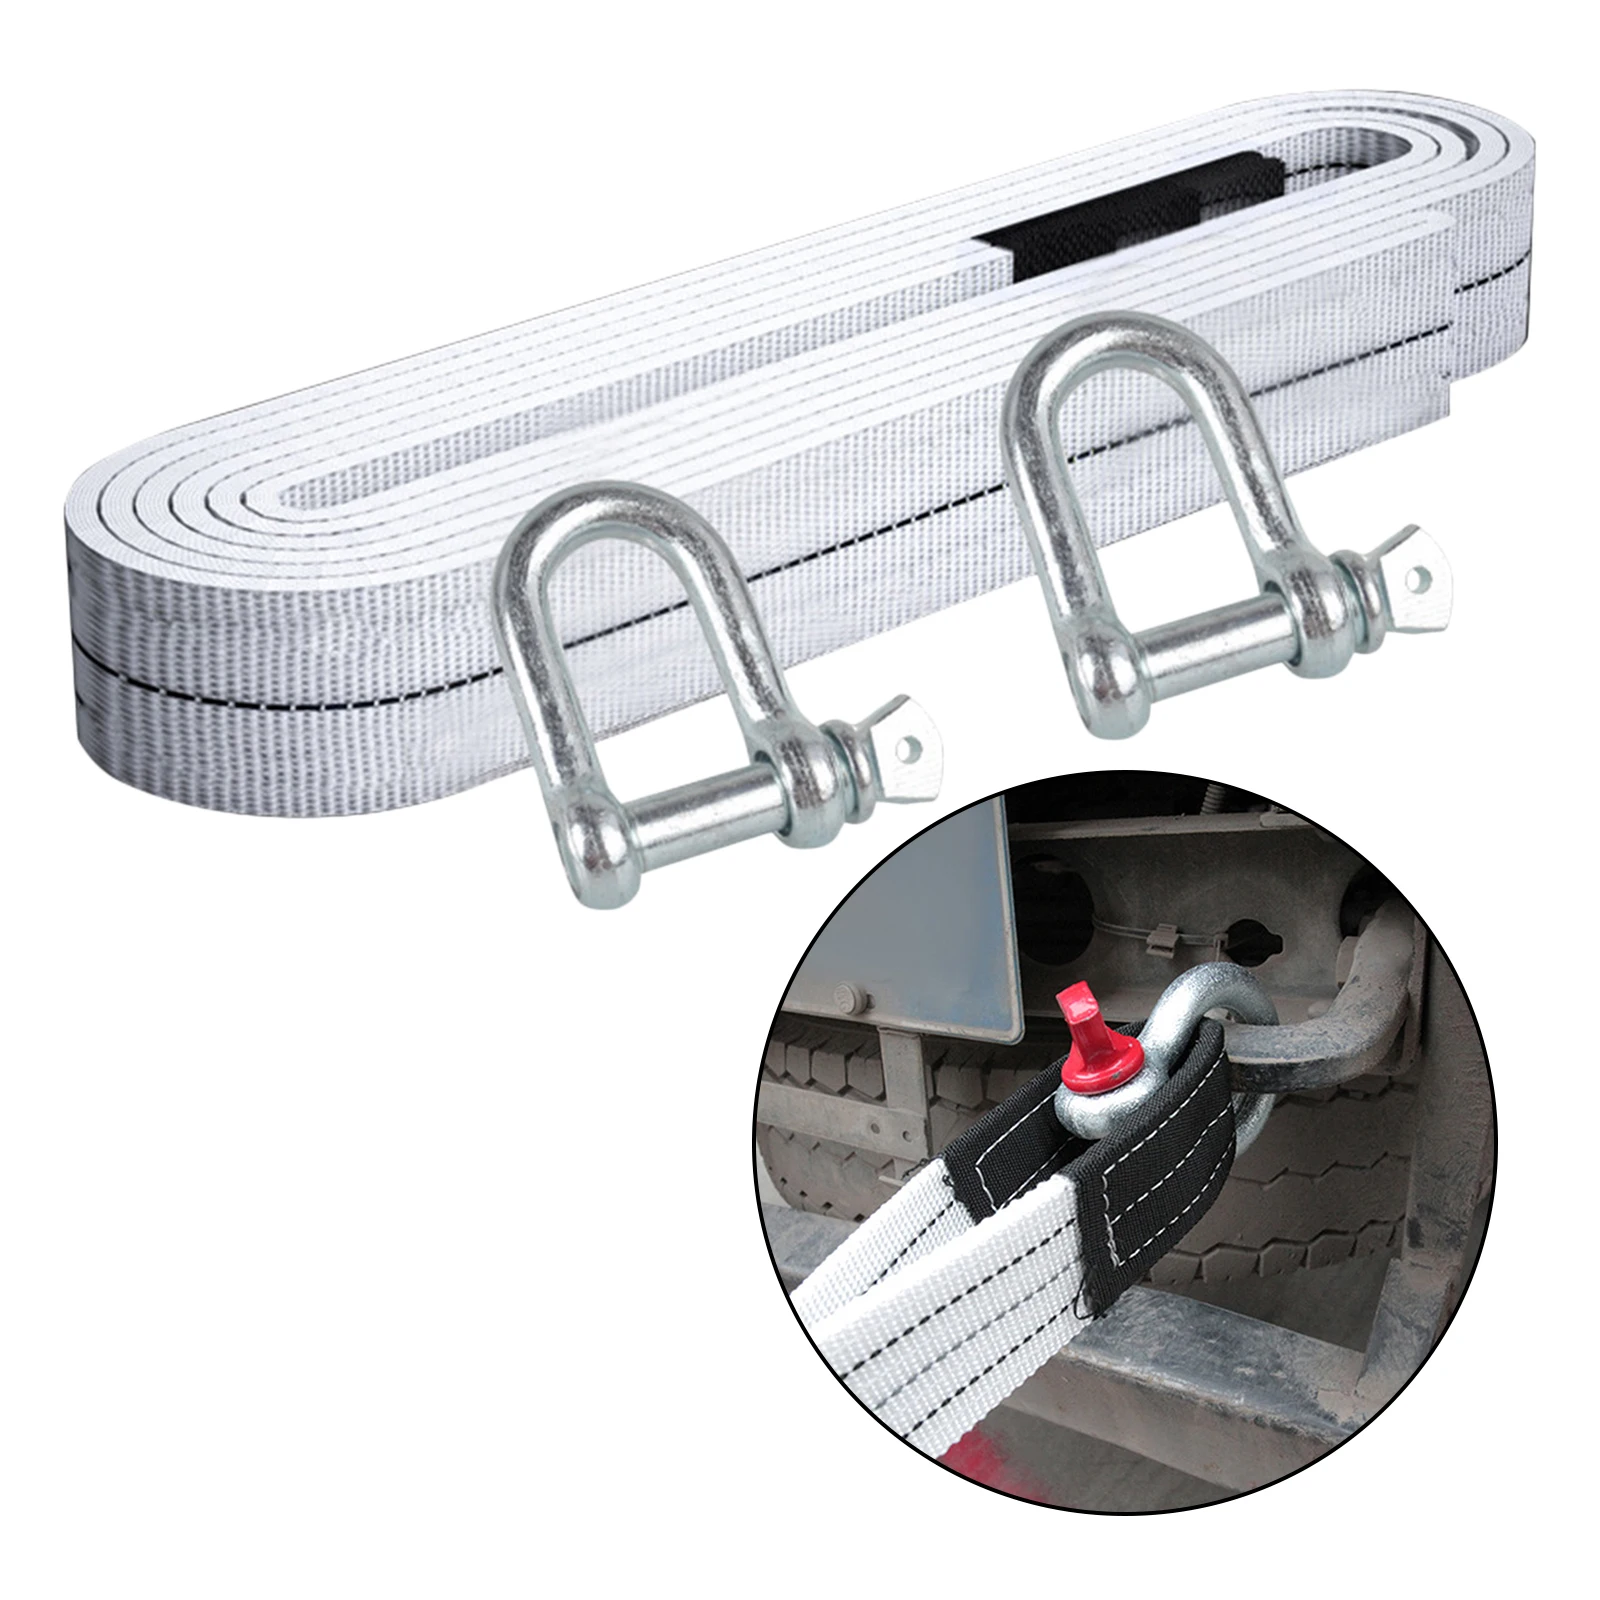 Trailer Winch Strap with Hook Replacement,6 Ton Capacity for Boats, Trailer, , Towing, Heavy Duty Equipment